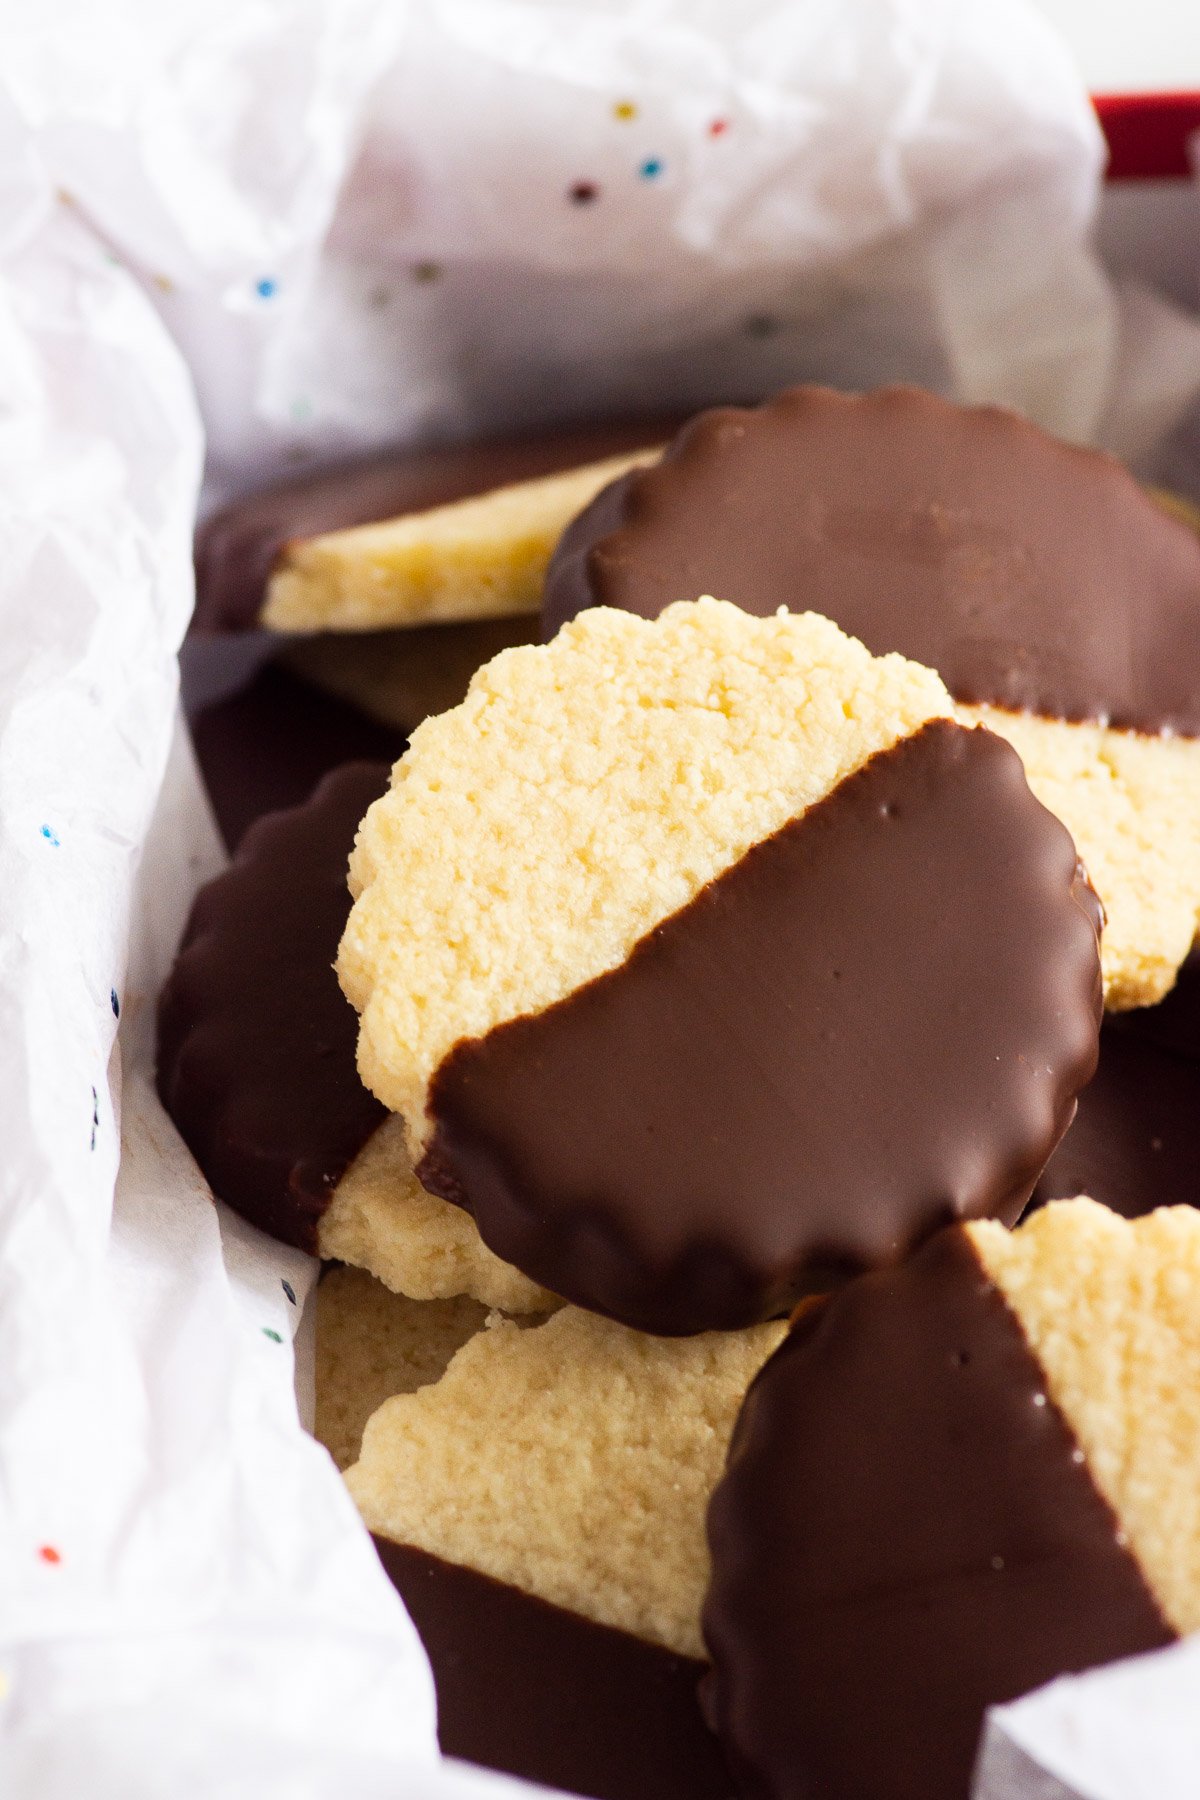 Chocolate dipped shortbread cookies laying on white tissue paper in a box.